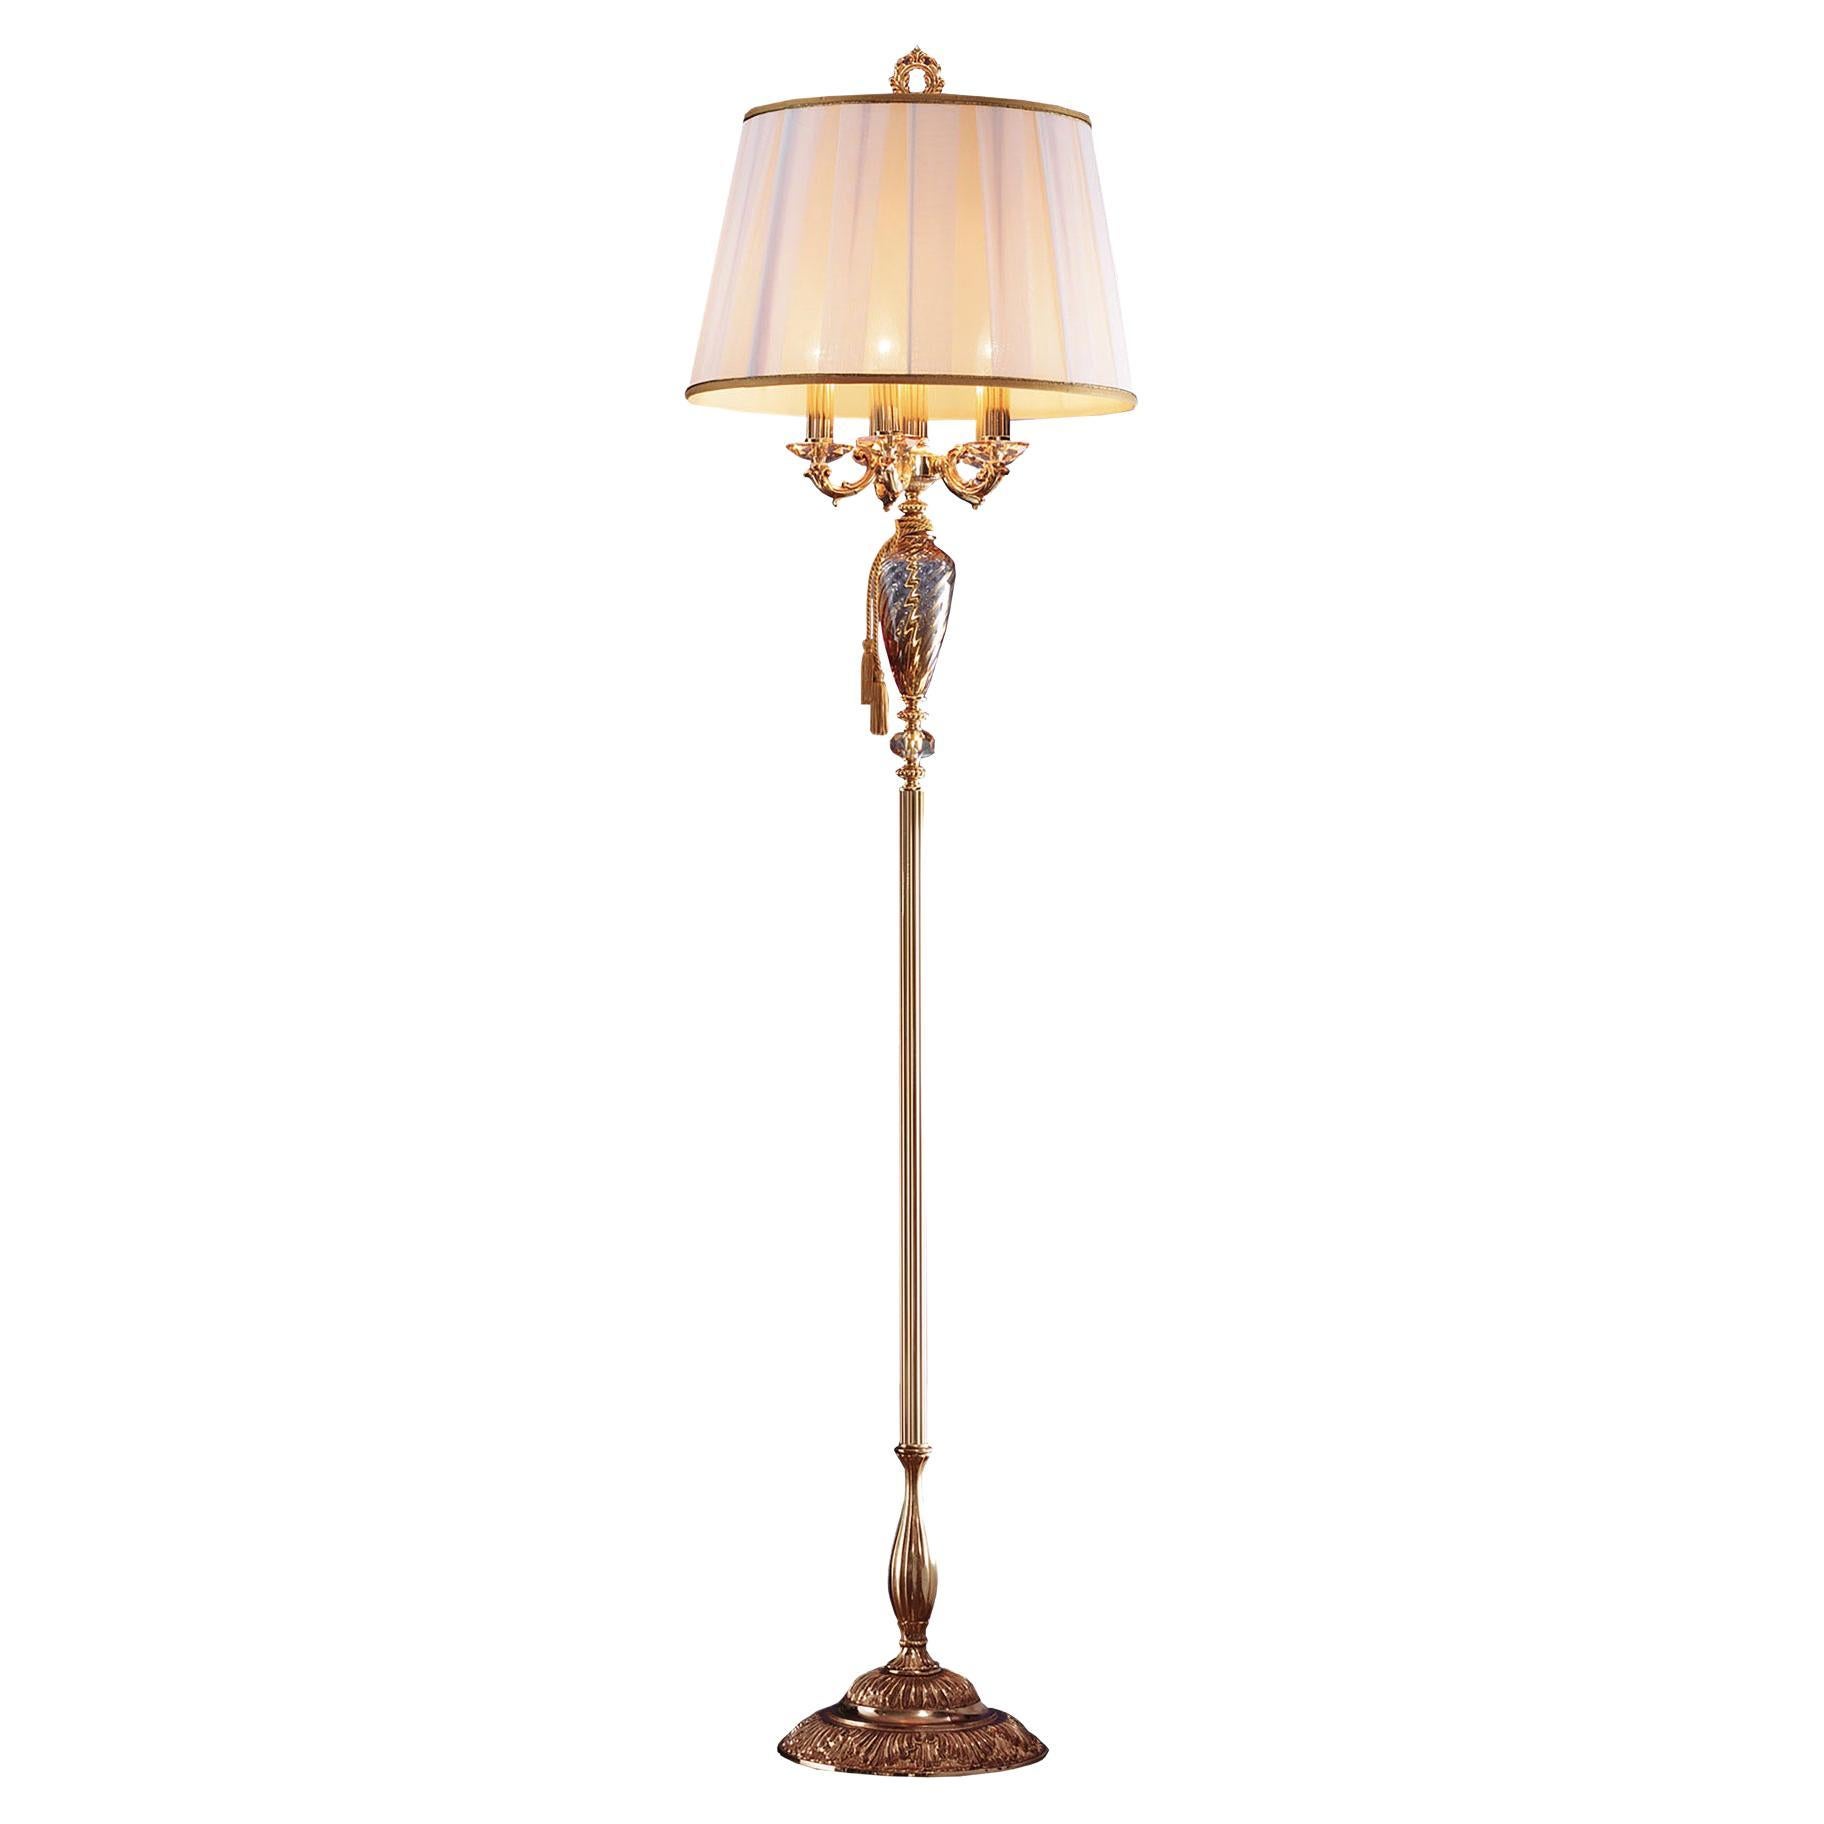 4 Lights Floor Lamp in Amber Glass in French Gold Finish by Modenese Interiors